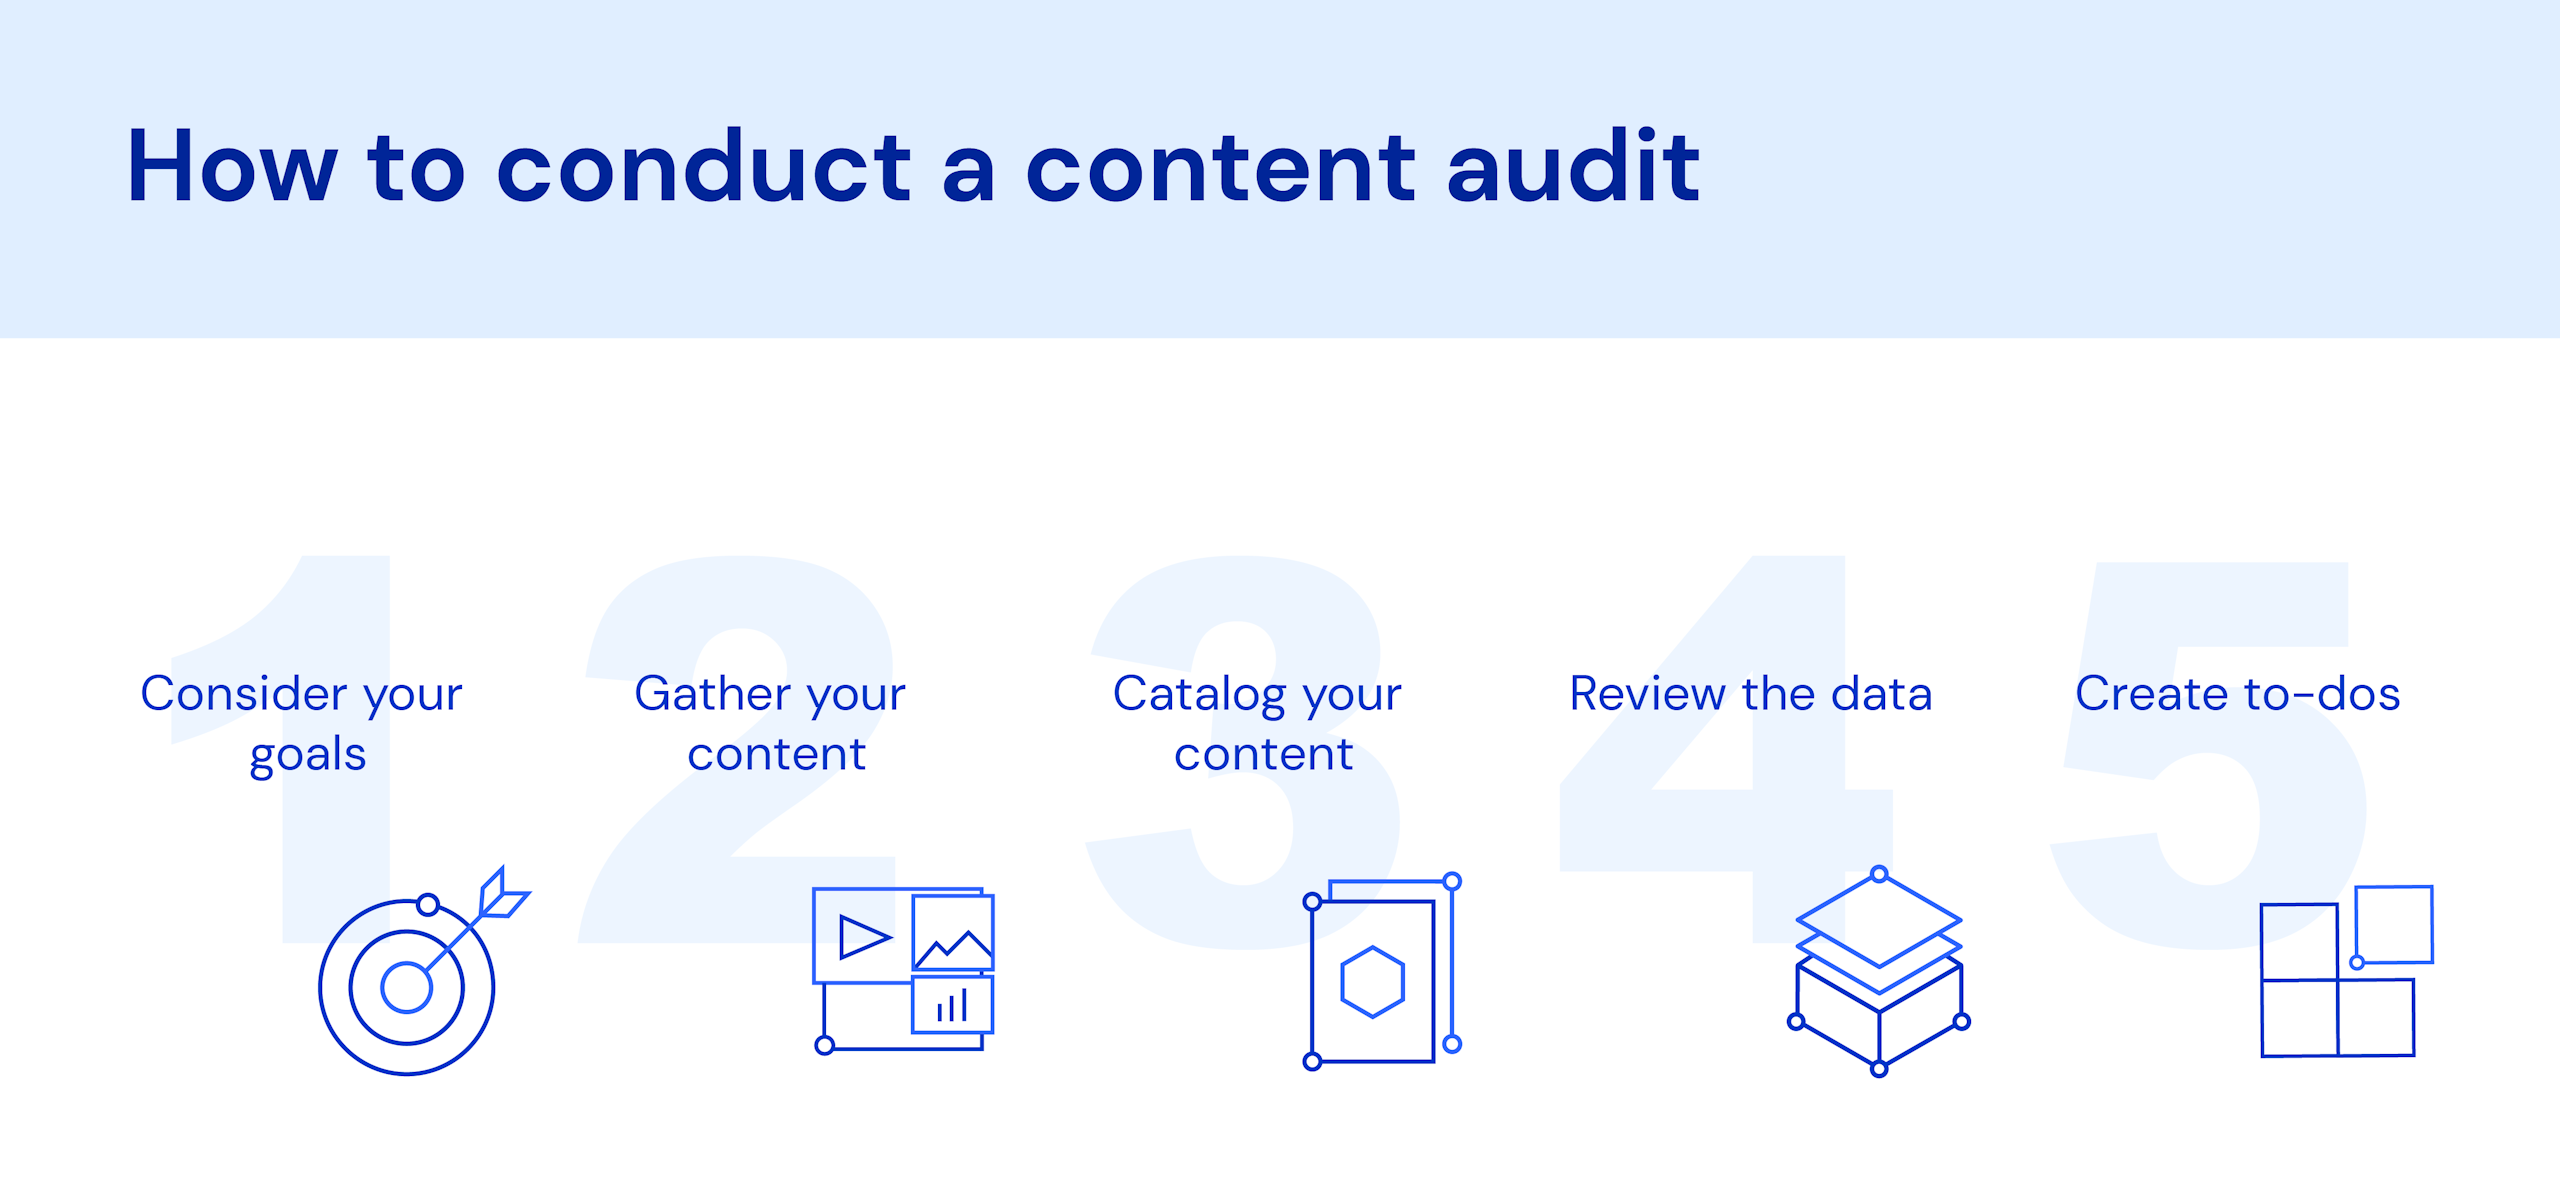 How to conduct a content audit